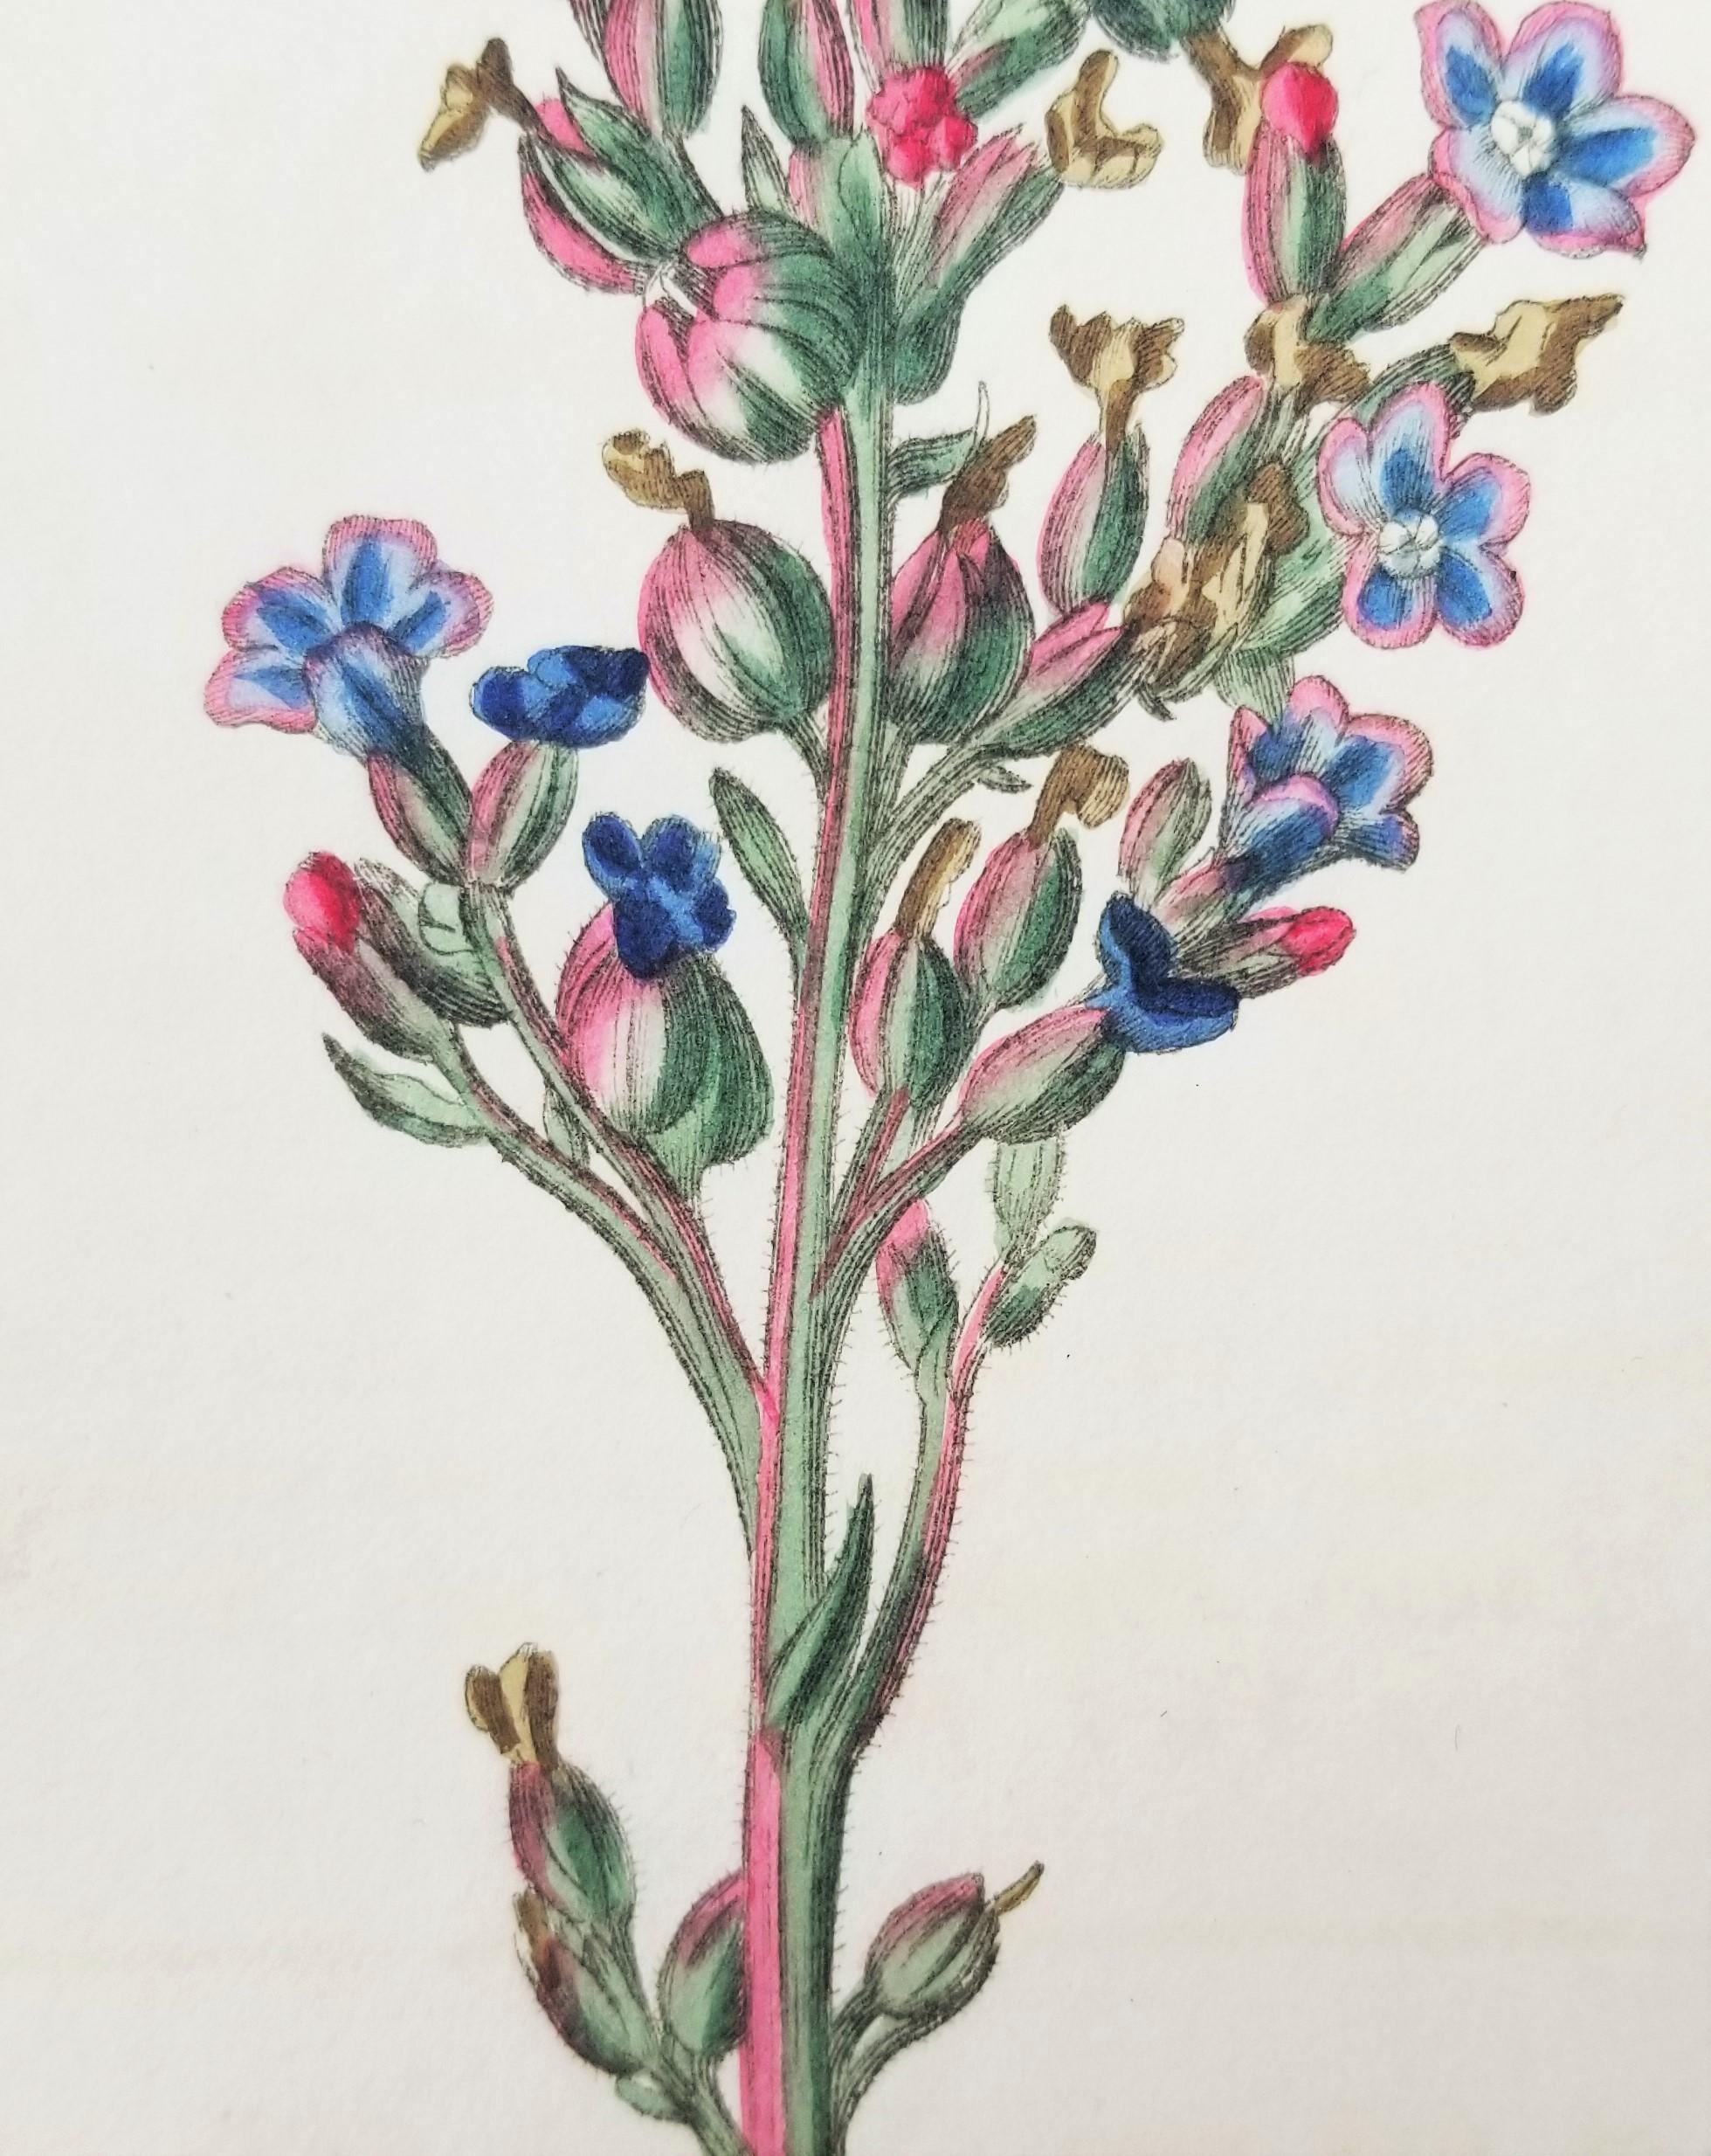 Artist: William Curtis (English, 1746-1799)
Title: Set of Six Hand-Colored Engravings
Portfolio: The Botanical Magazine
Year: 1804-1816
Medium: Set of Six Original Hand-Colored Engravings on wove paper
Limited edition: approx. 3,000
Printer: